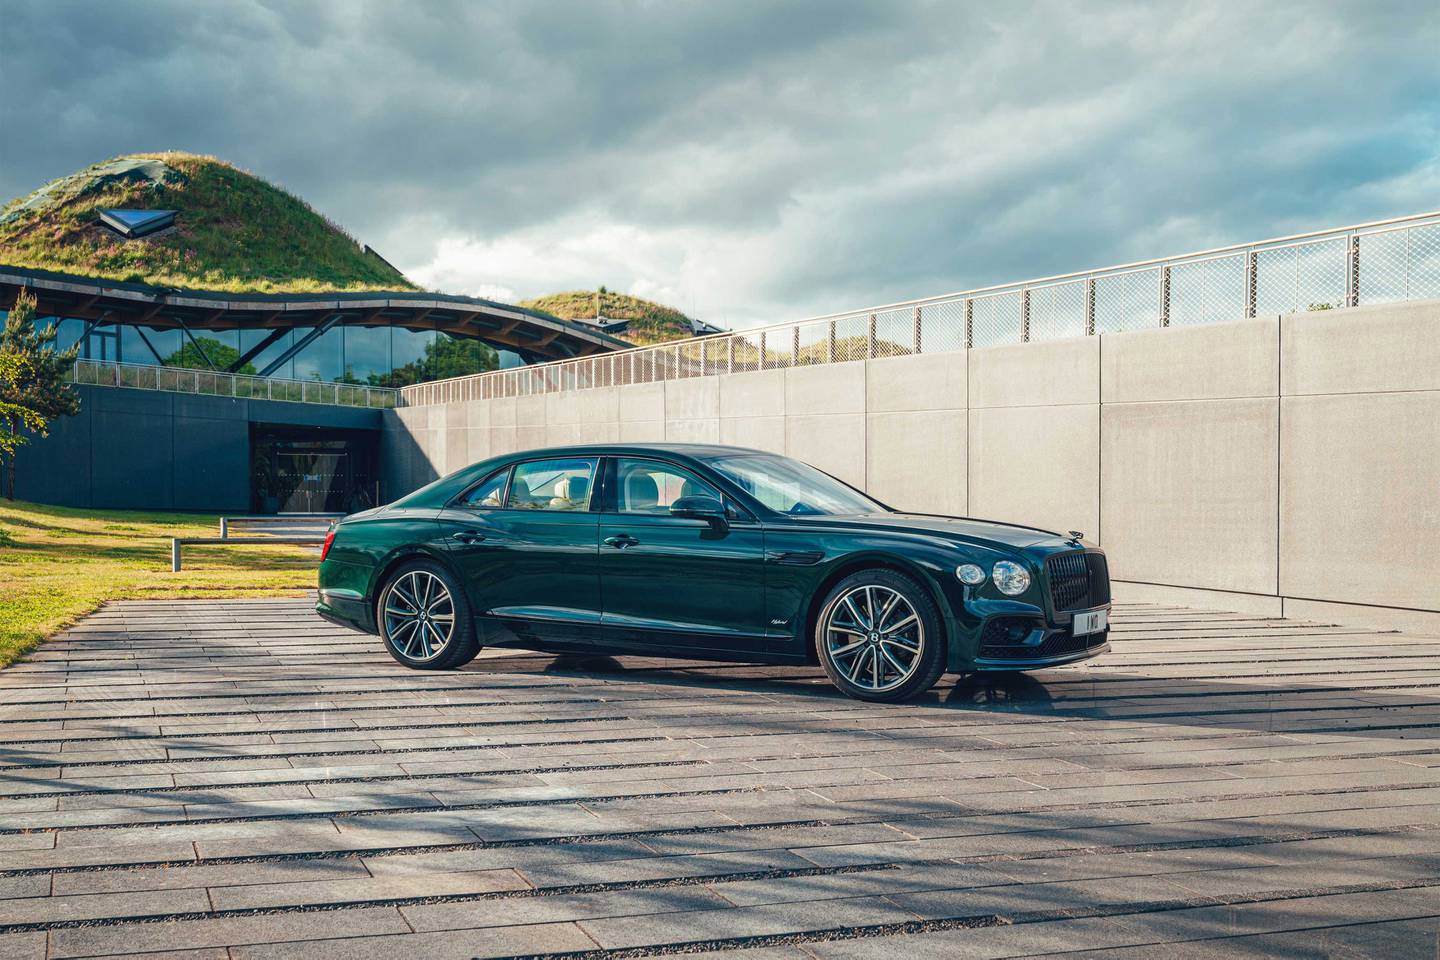 Bentley Flying Spur Hybrid can cover over 700 kilometres when fully fuelled. Courtesy Bentley 